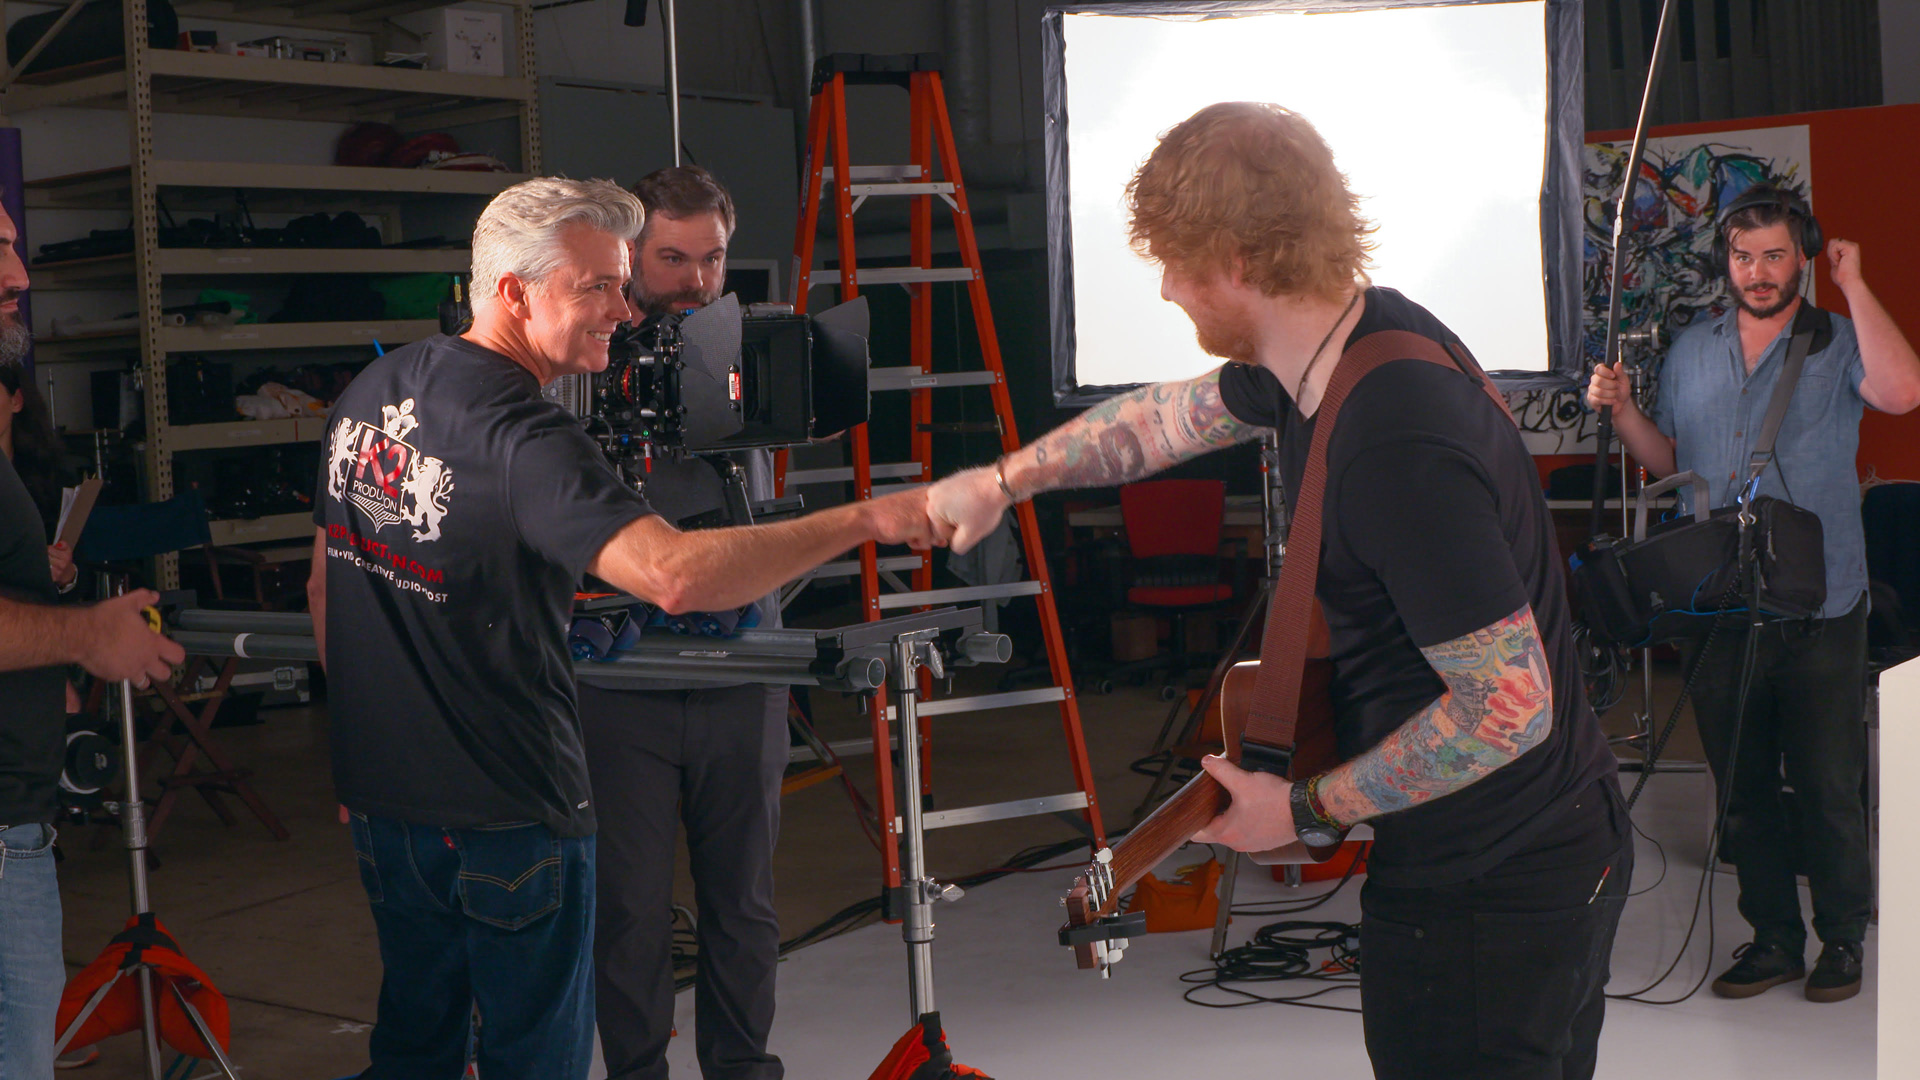 K2 Productions Ed Sheeran video production behind-the-scenes